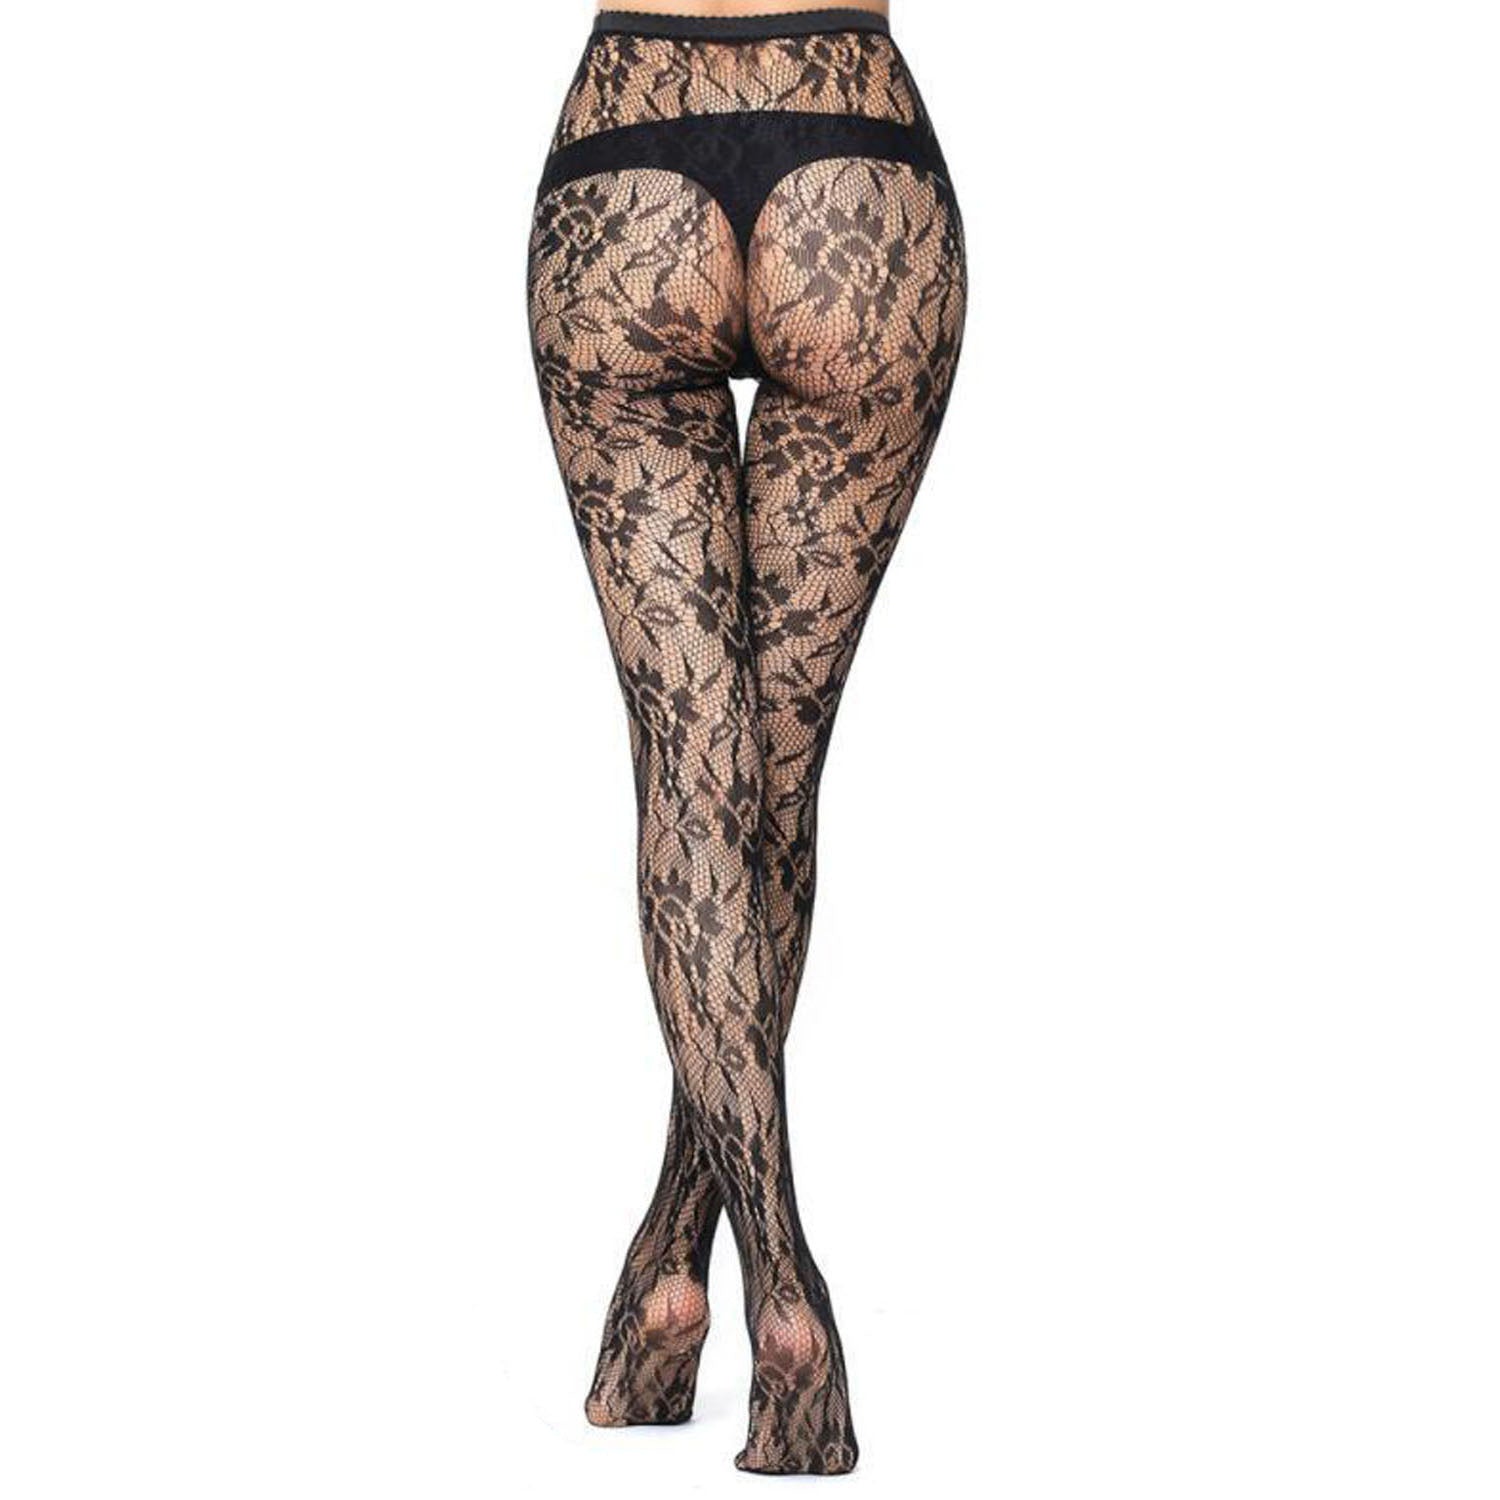 Simply Joshimo Floral Patterned Black Fishnet Tights